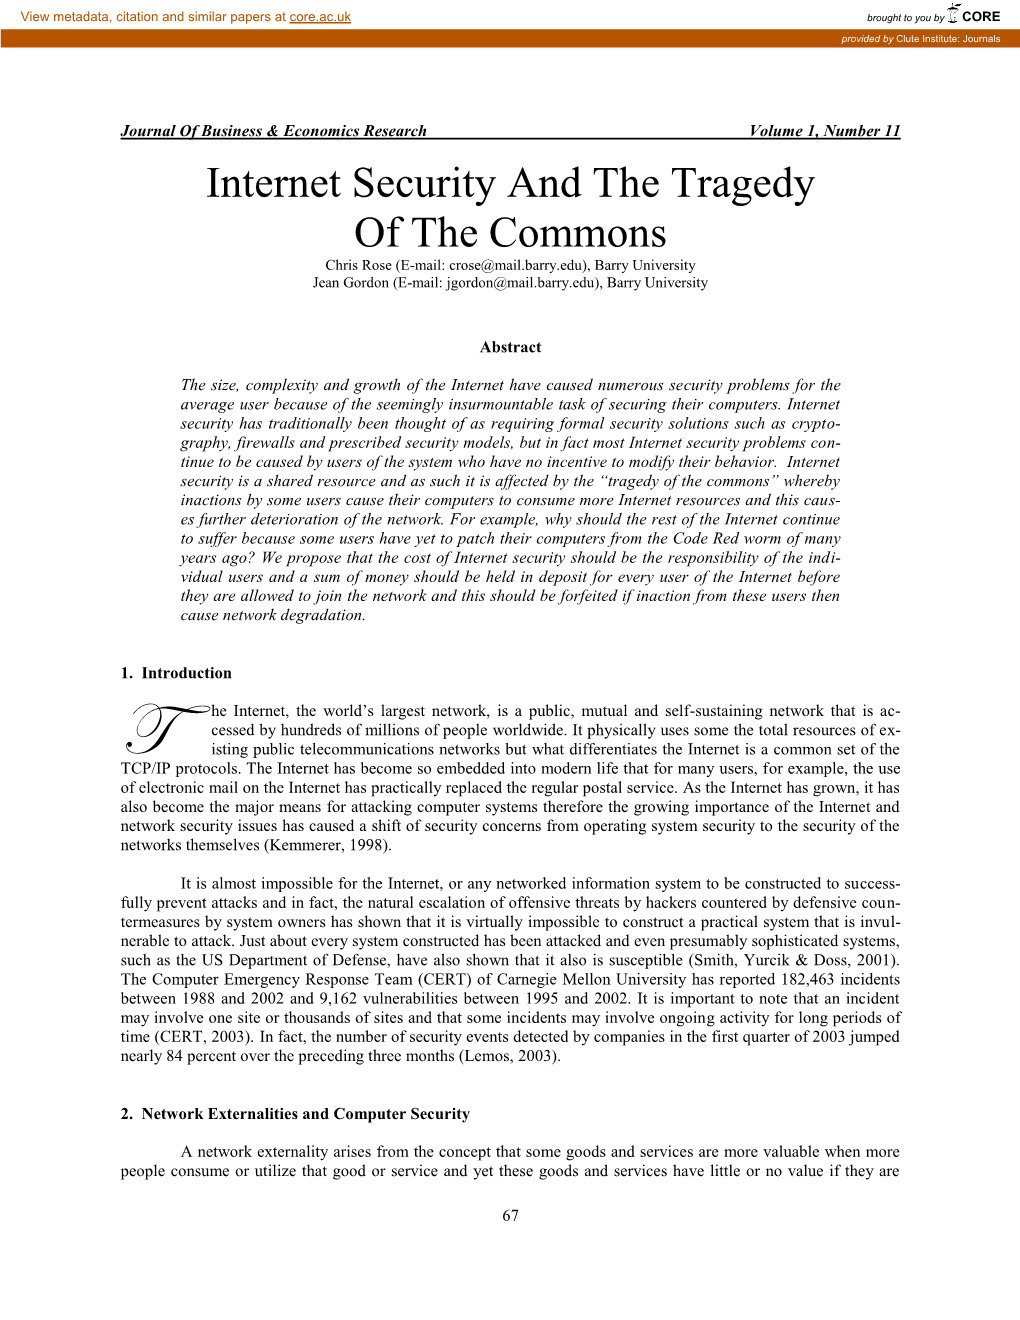 Internet Security and the Tragedy of the Commons